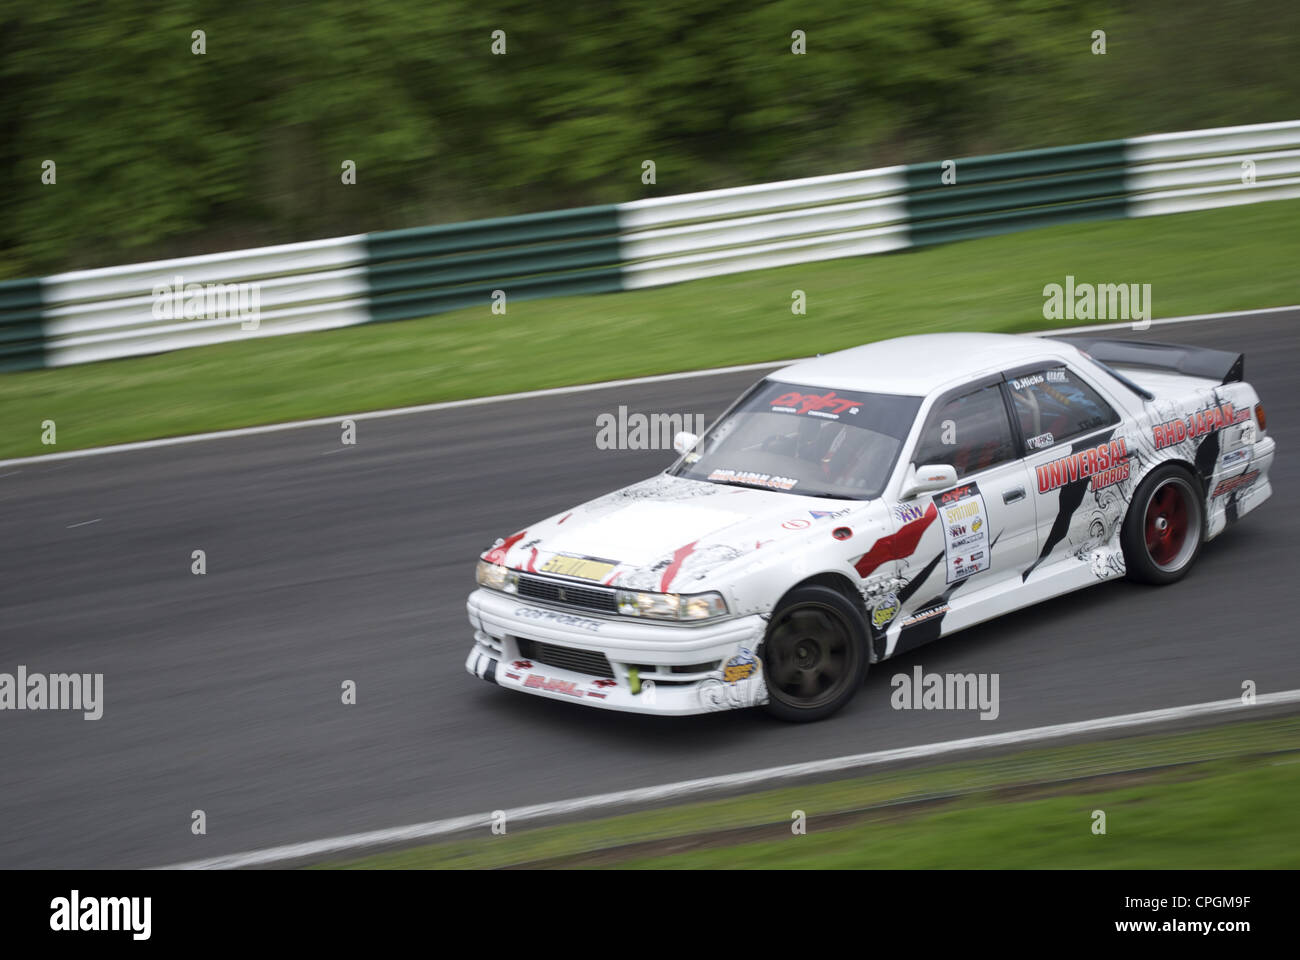 Declan Hicks drifting his Toyota Chaser at the European Drifting championships at Cadwell Park 2012 Stock Photo